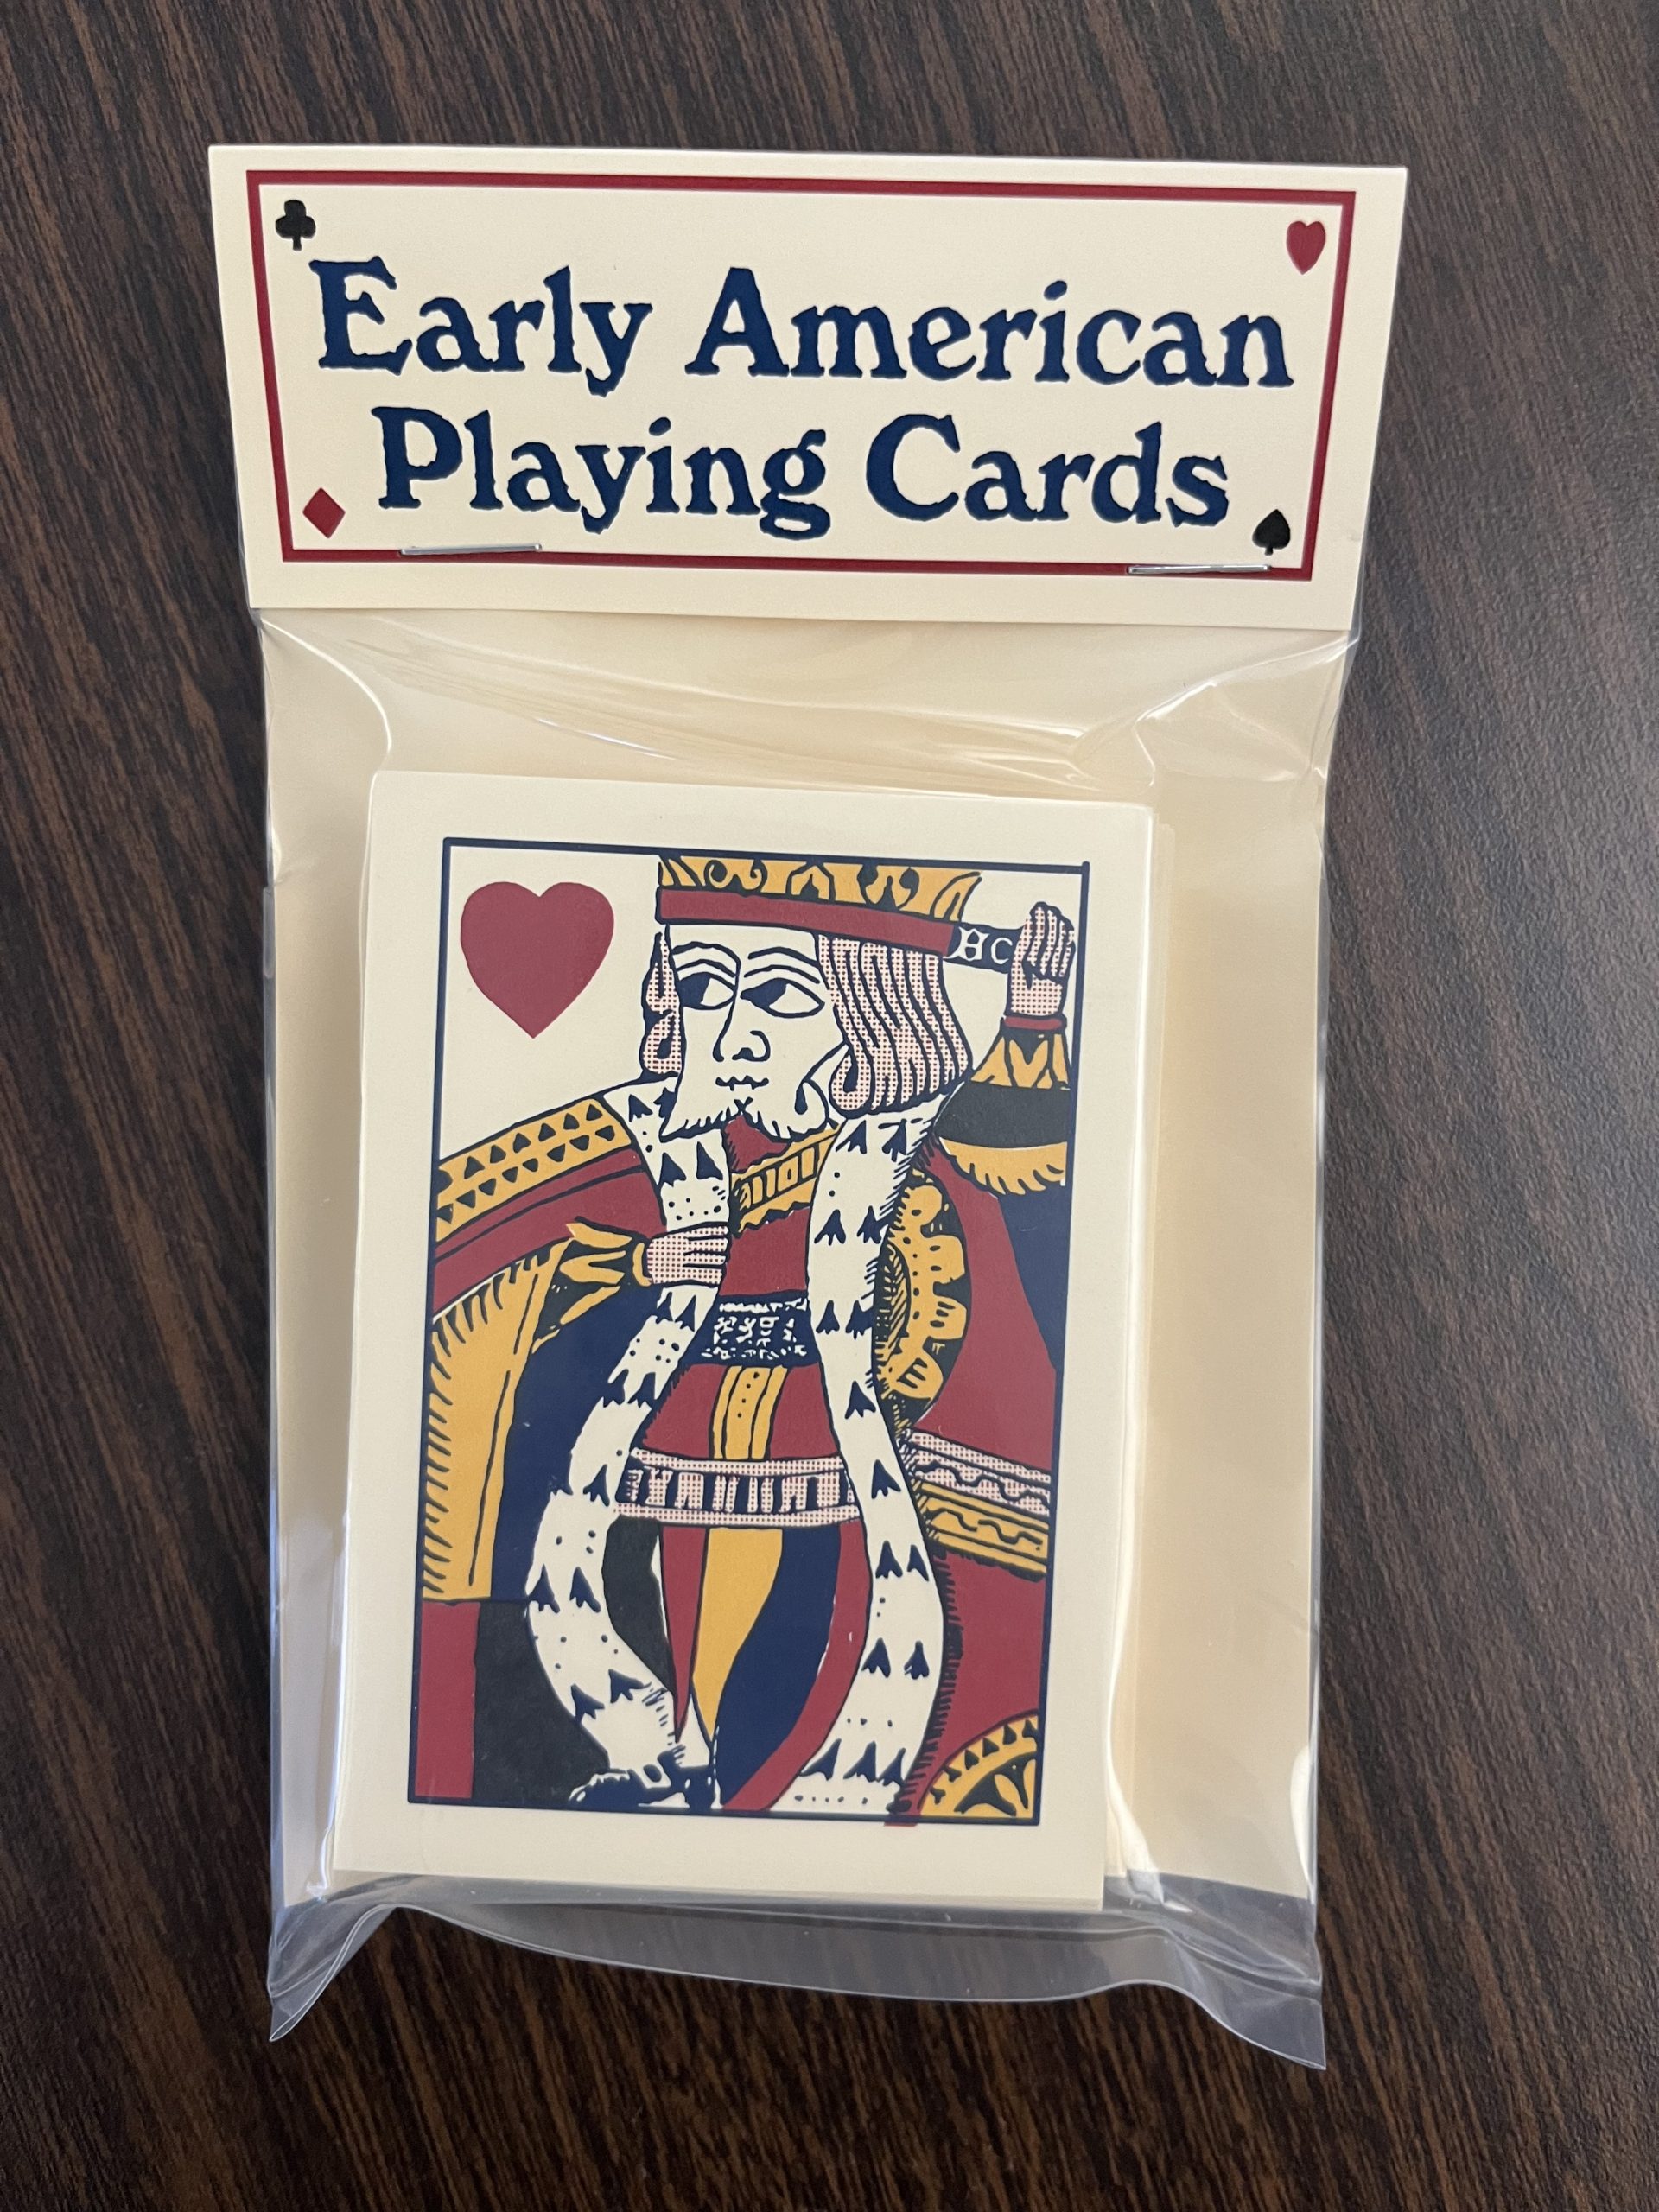 Early American Playing Cards